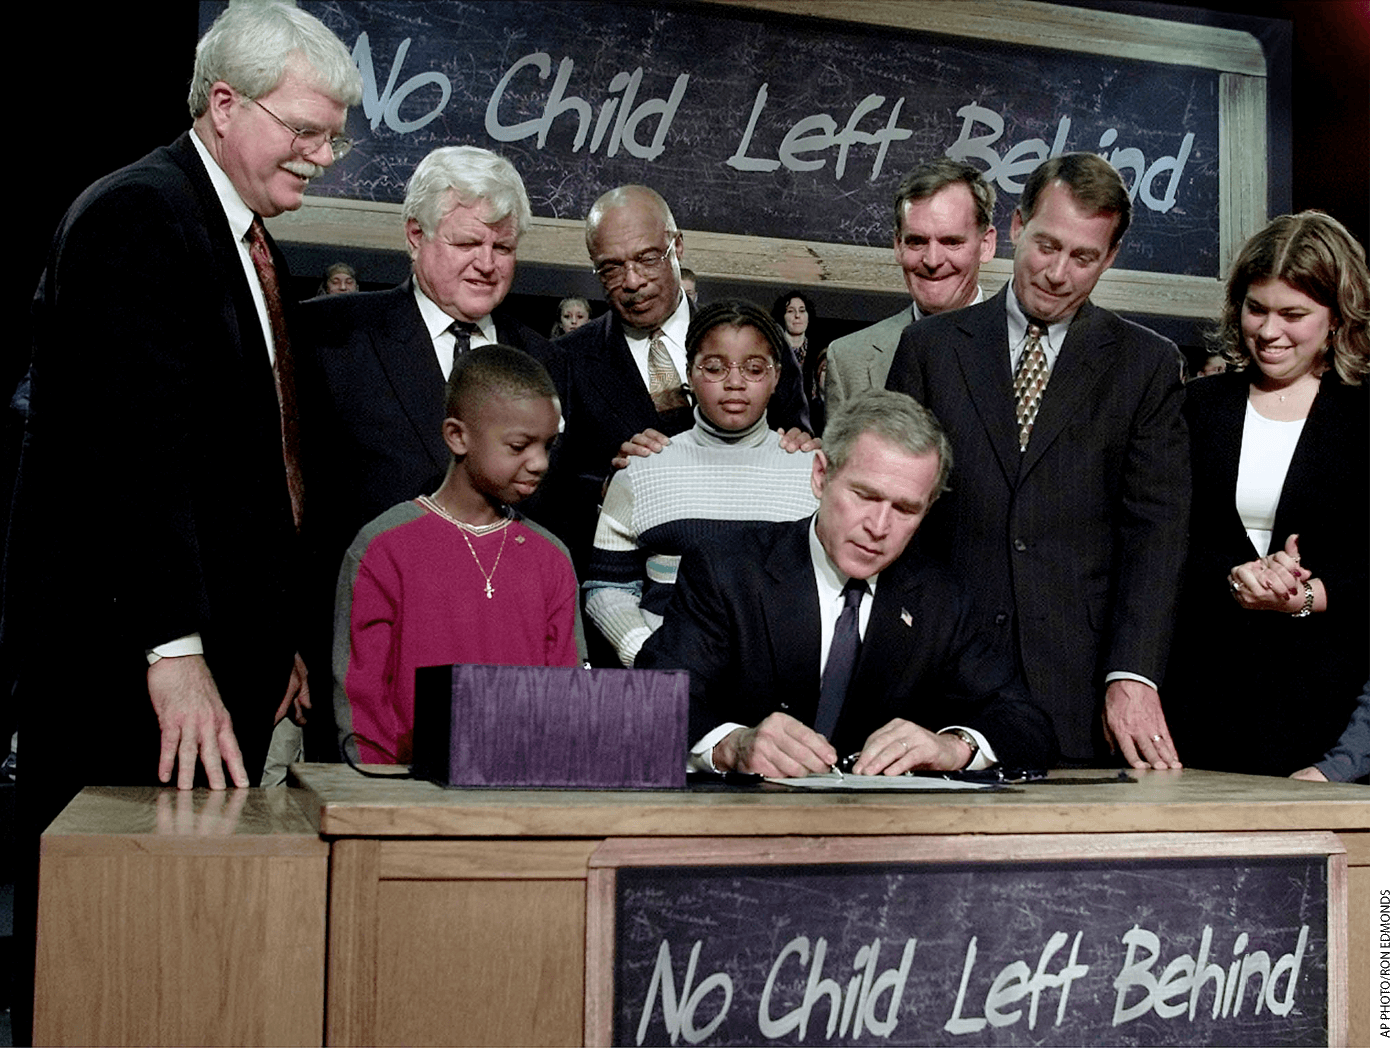 President George W. Bush signing the No Child Left Behind act in 2002